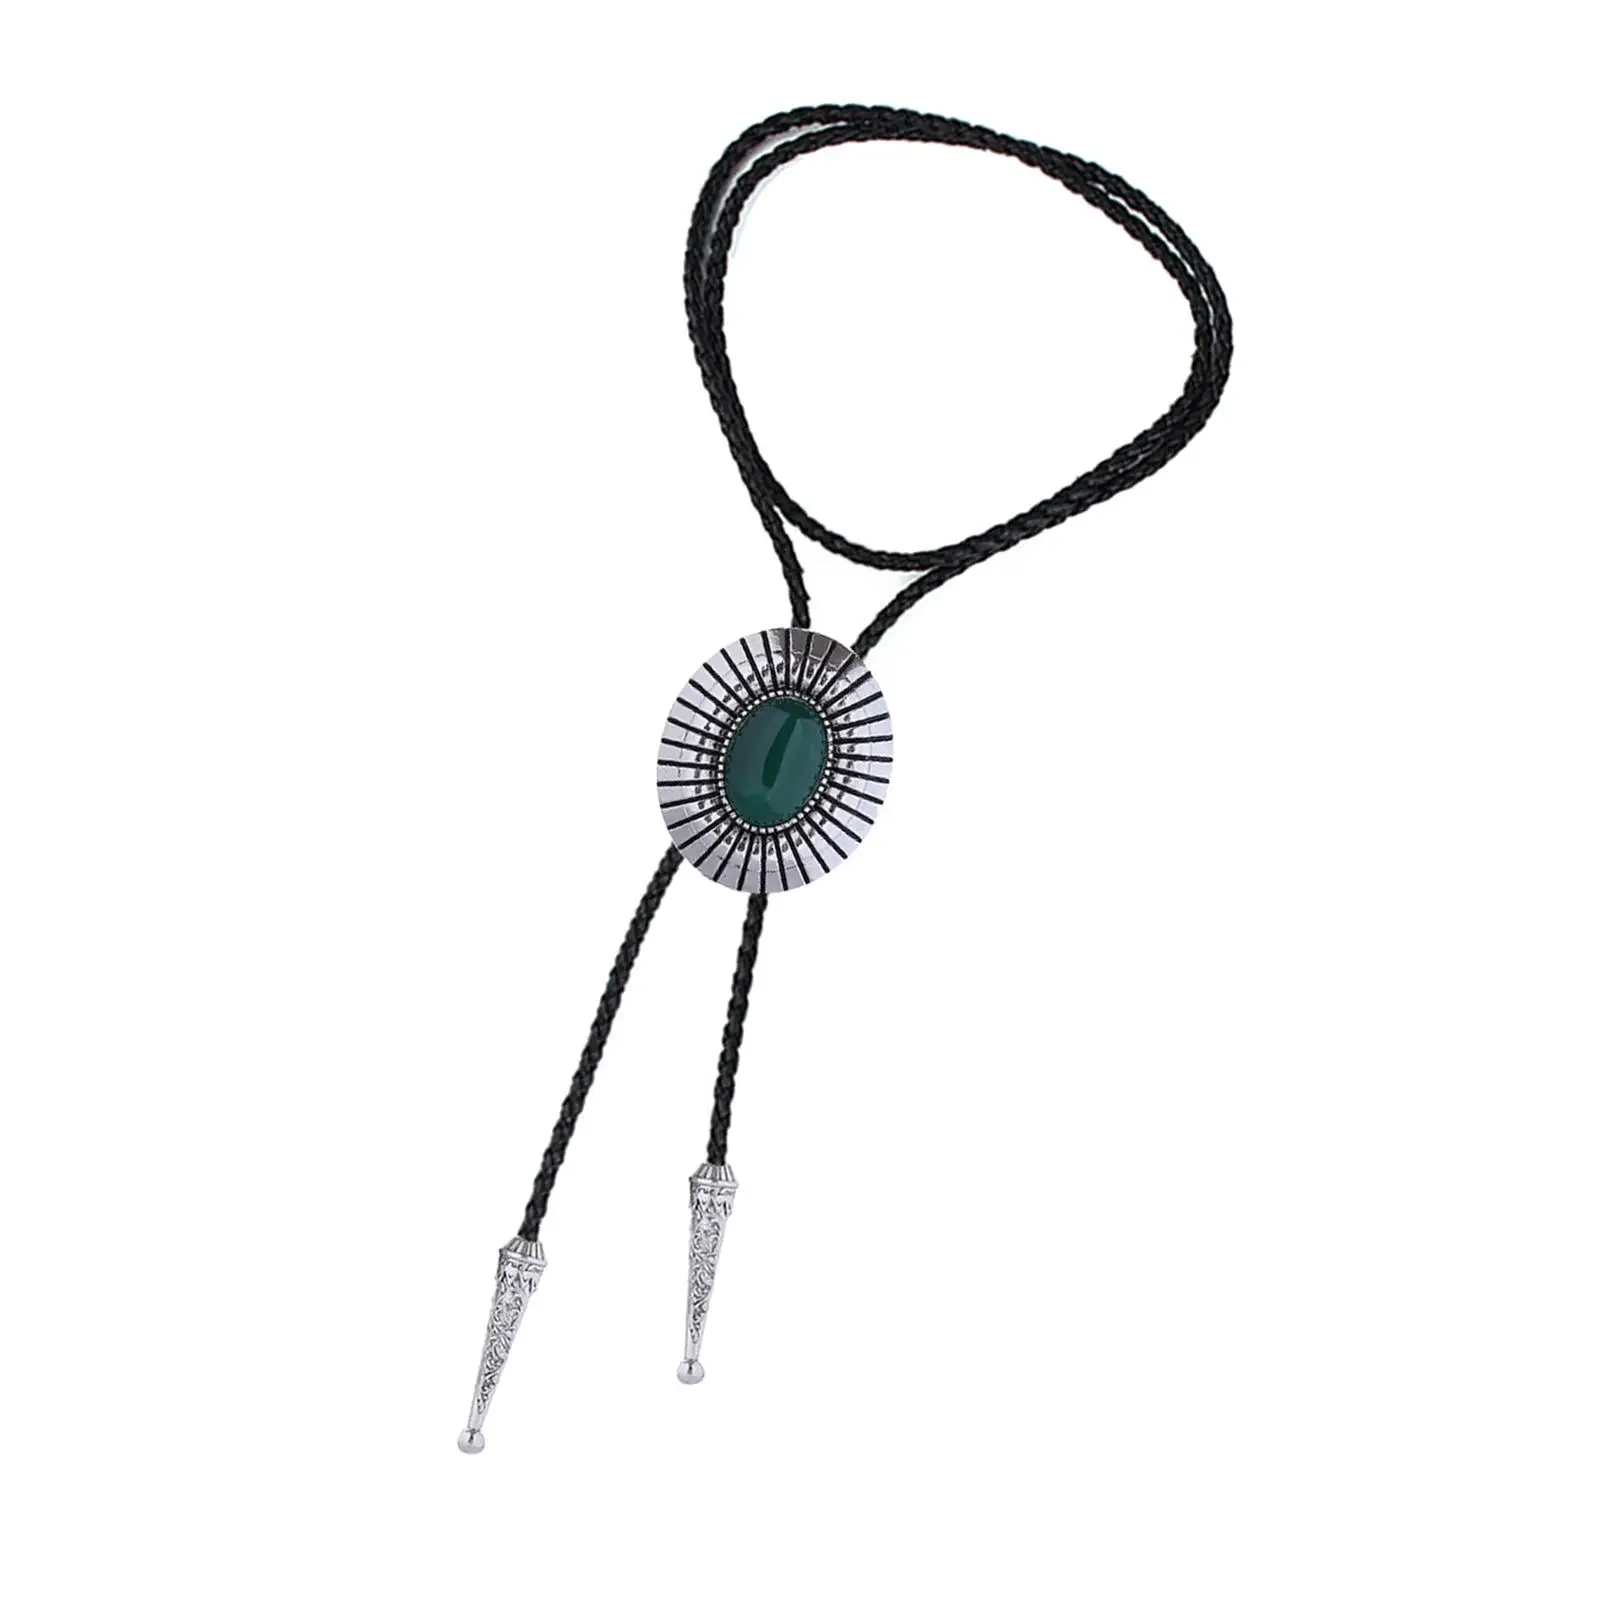 Bolo Tie Necktie Costume Alloy PU Leather Oval Rodeo Gift Retro Adjustable Vintage American Necklace for Birthday Party Men